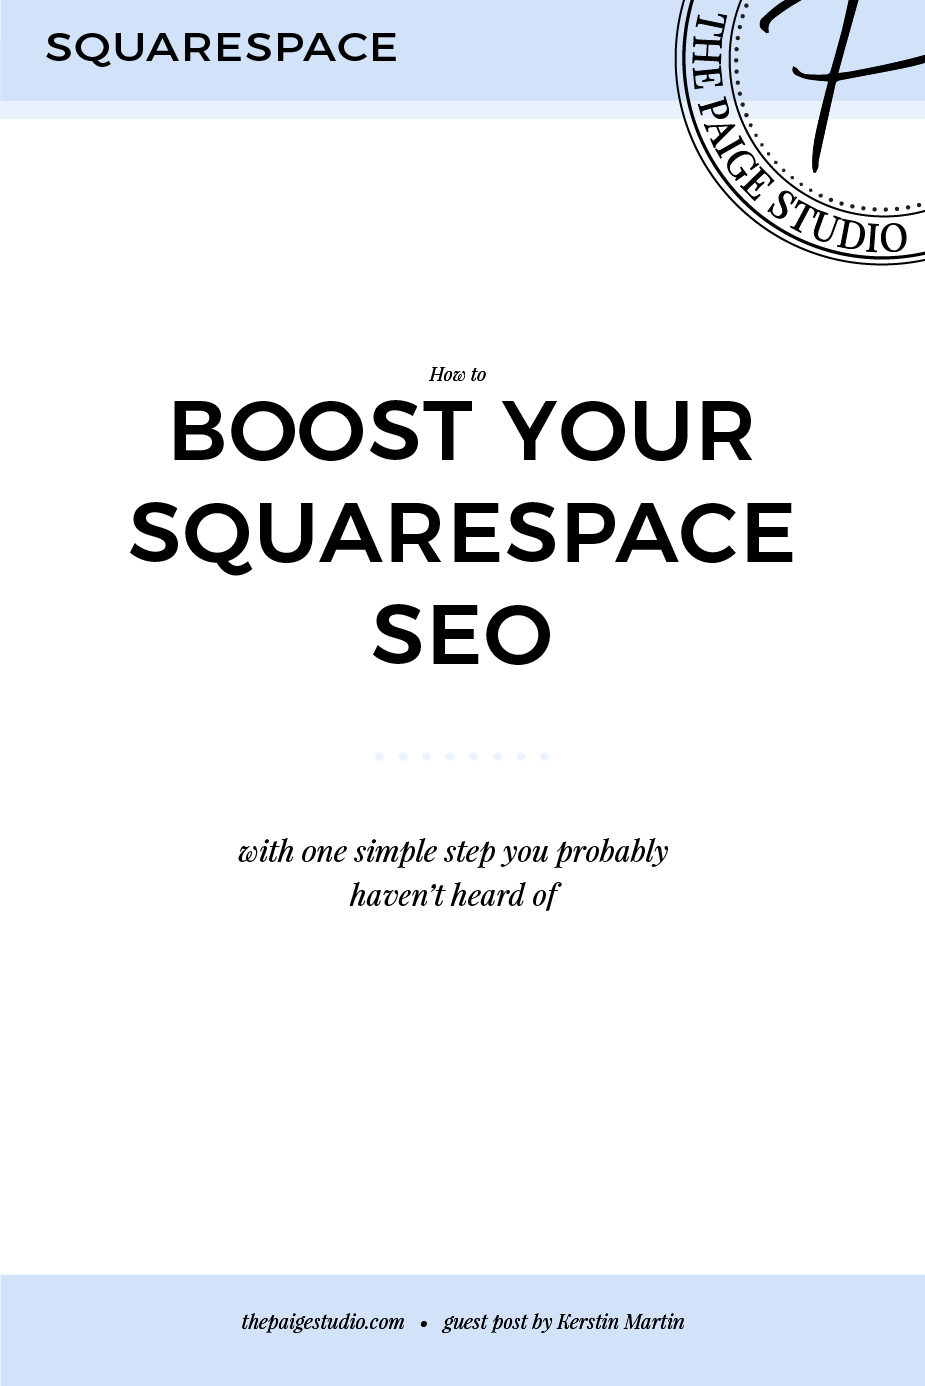 Boost your Squarespace SEO with one simple step that you probably haven’t heard of!